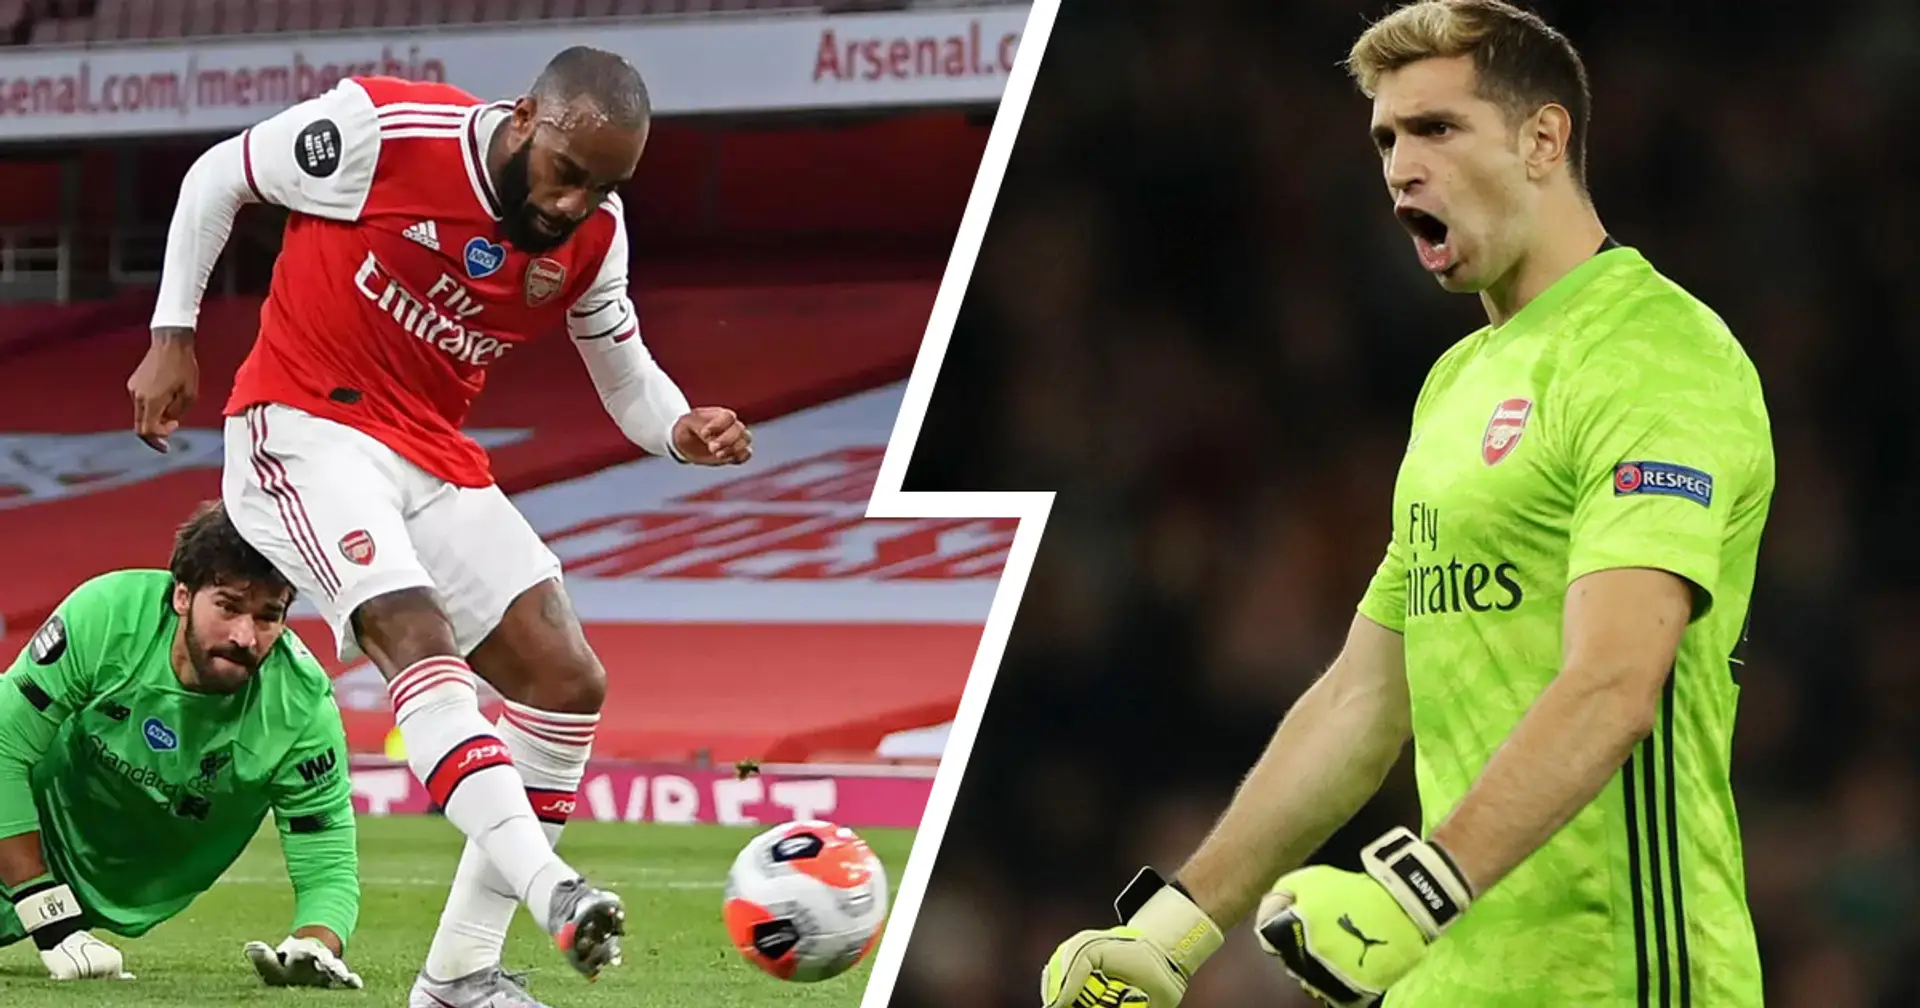 4 Gunners who contributed the most to beating Liverpool: ratings